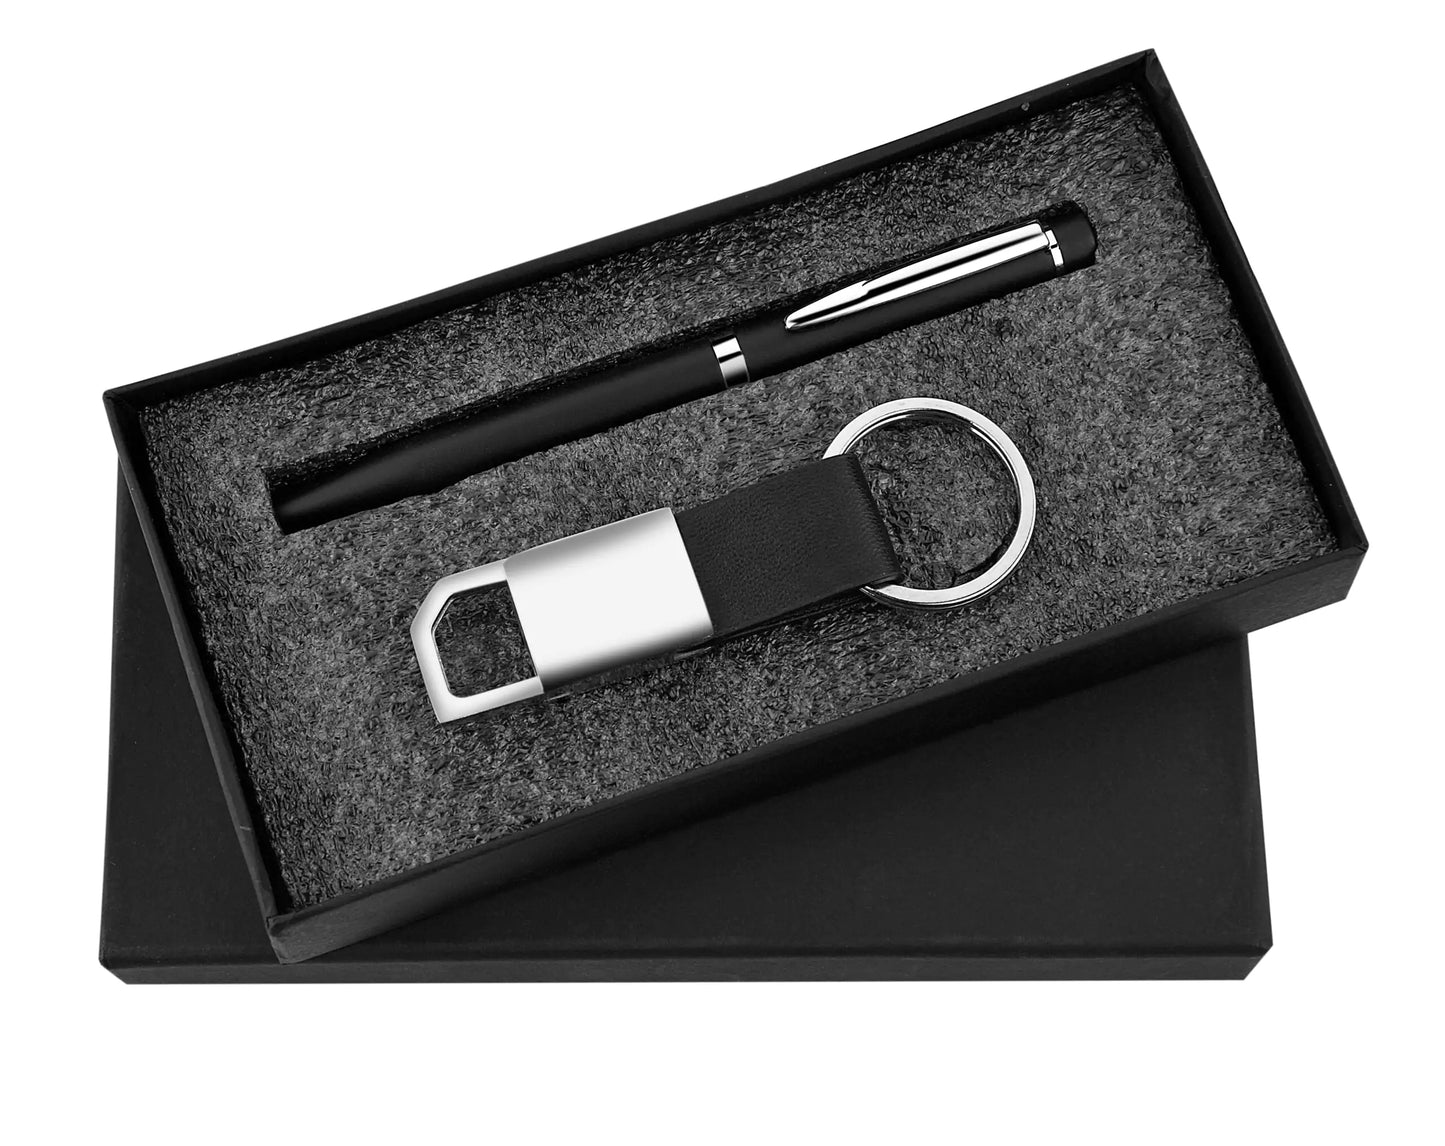 Pen and Keychain 2in1 Combo Gift Set - For Employee Joining Kit, Corporate, Client or Dealer Gifting, Promotional Freebie JK11